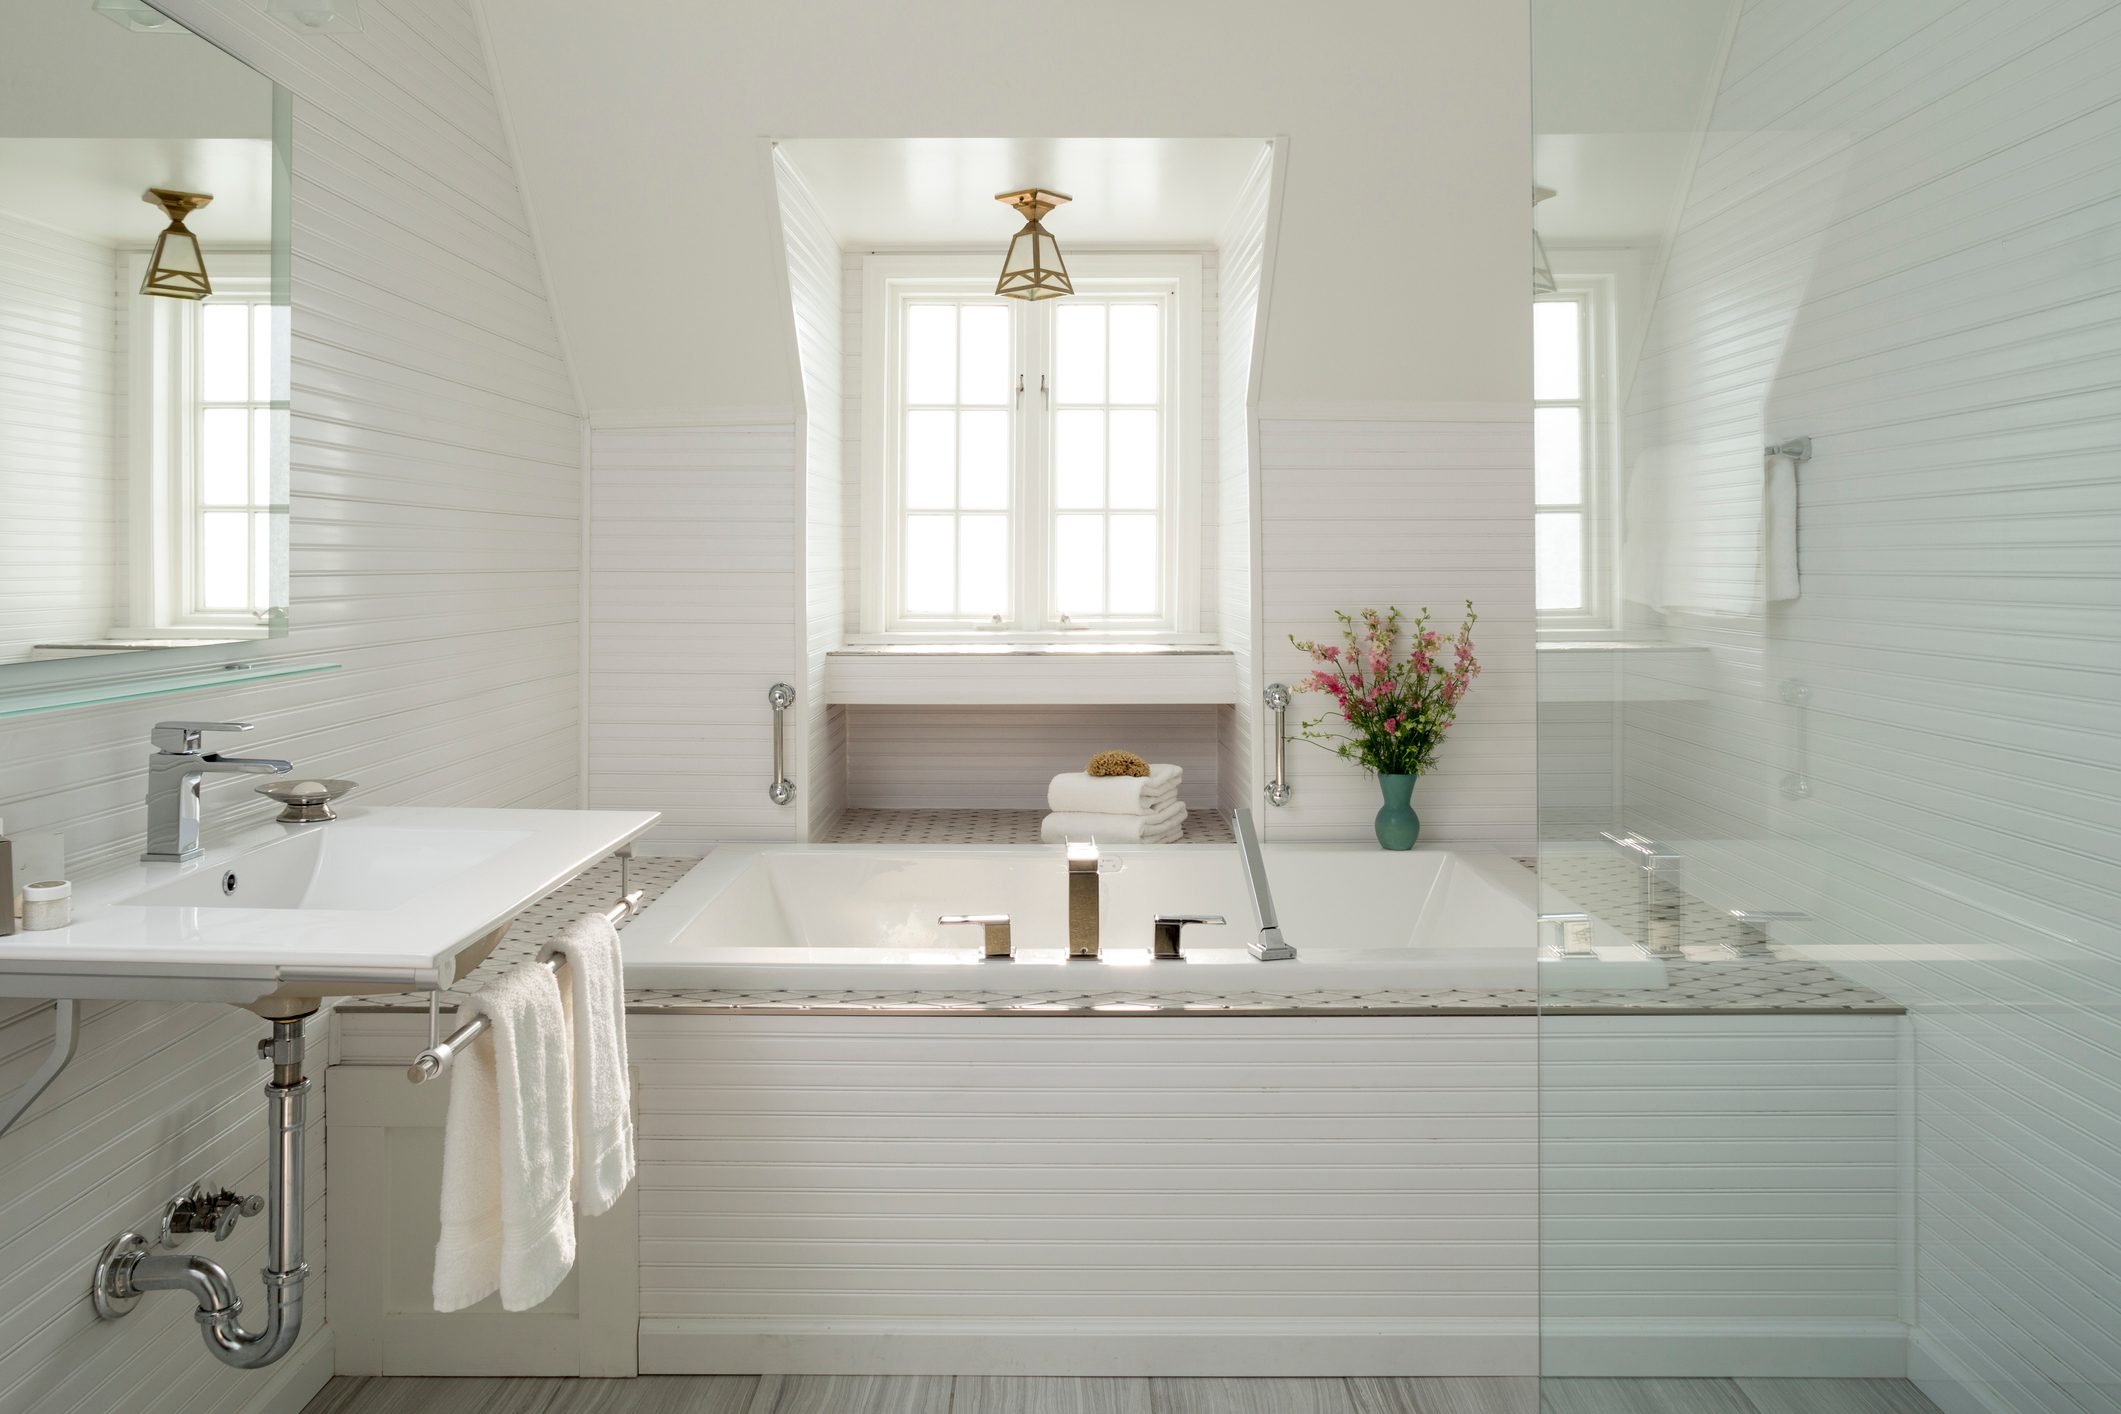 Drop-in Bathtubs Buyers Guide: Types, Cost and Installation